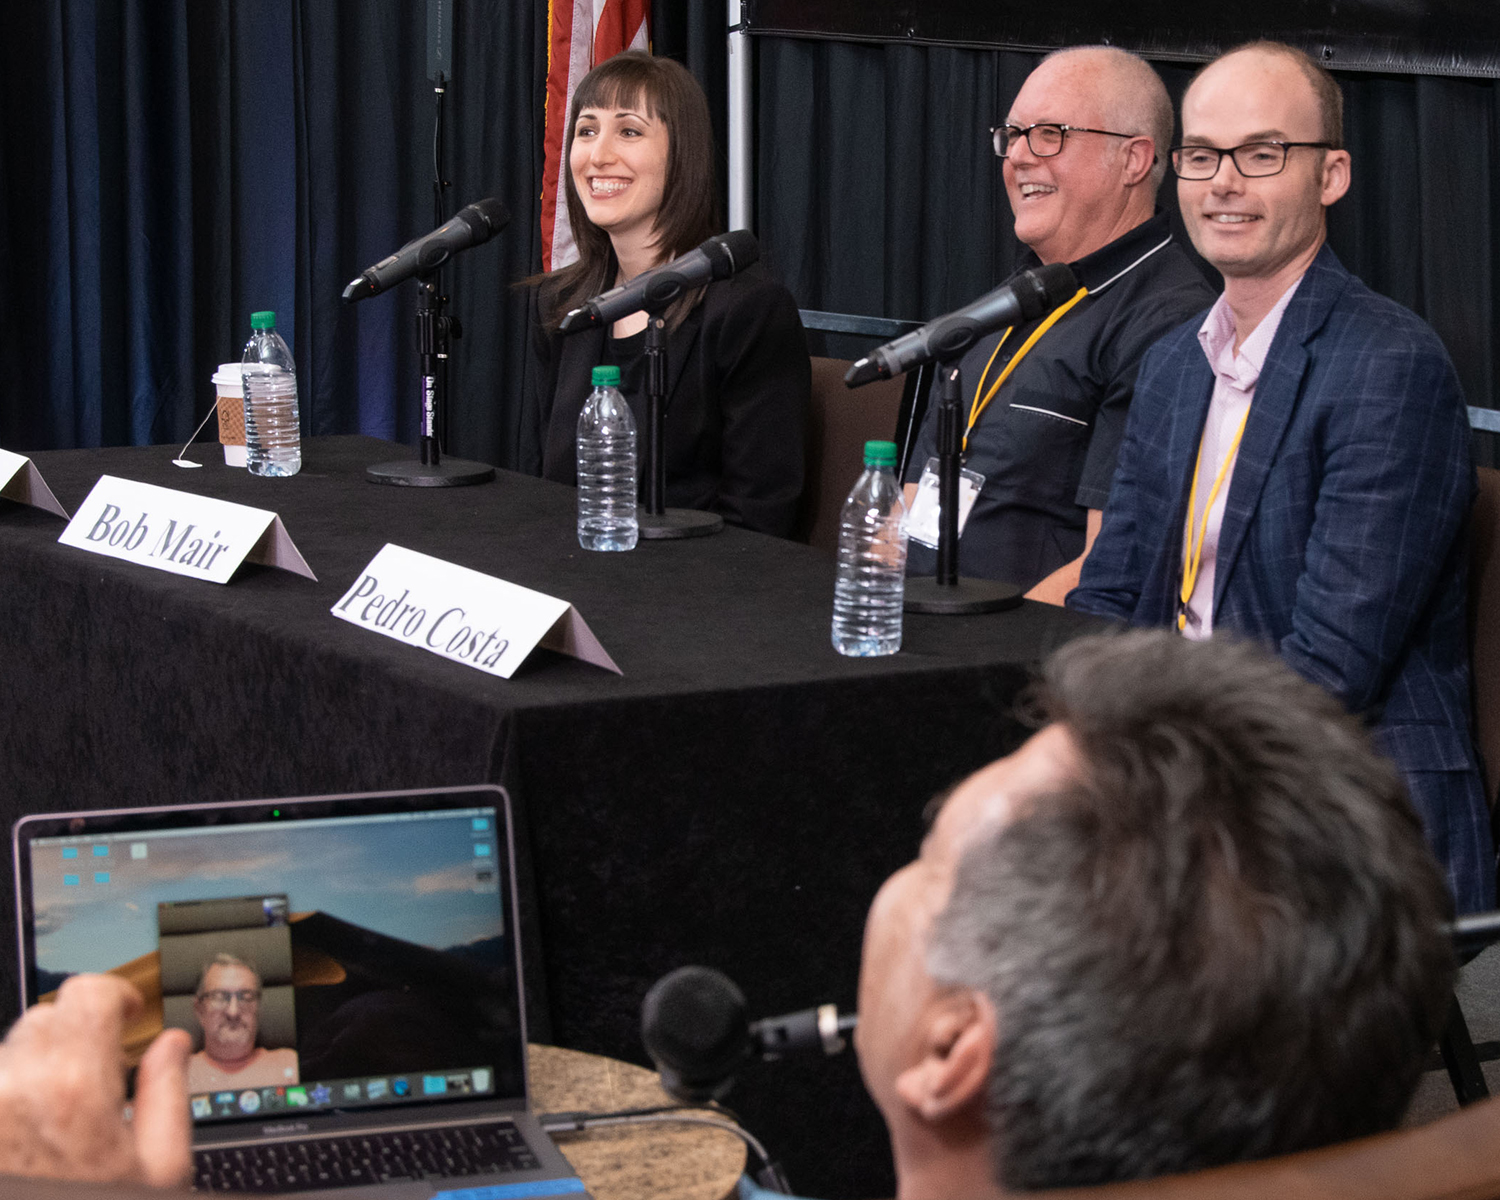 Panelist (l to r) Erin Jacobson, Bob Mair, Pedro Costa, and Michael Eames (on Michael Laskow's laptop) enjoy a light moment during their panel at the TAXI Road Rally.